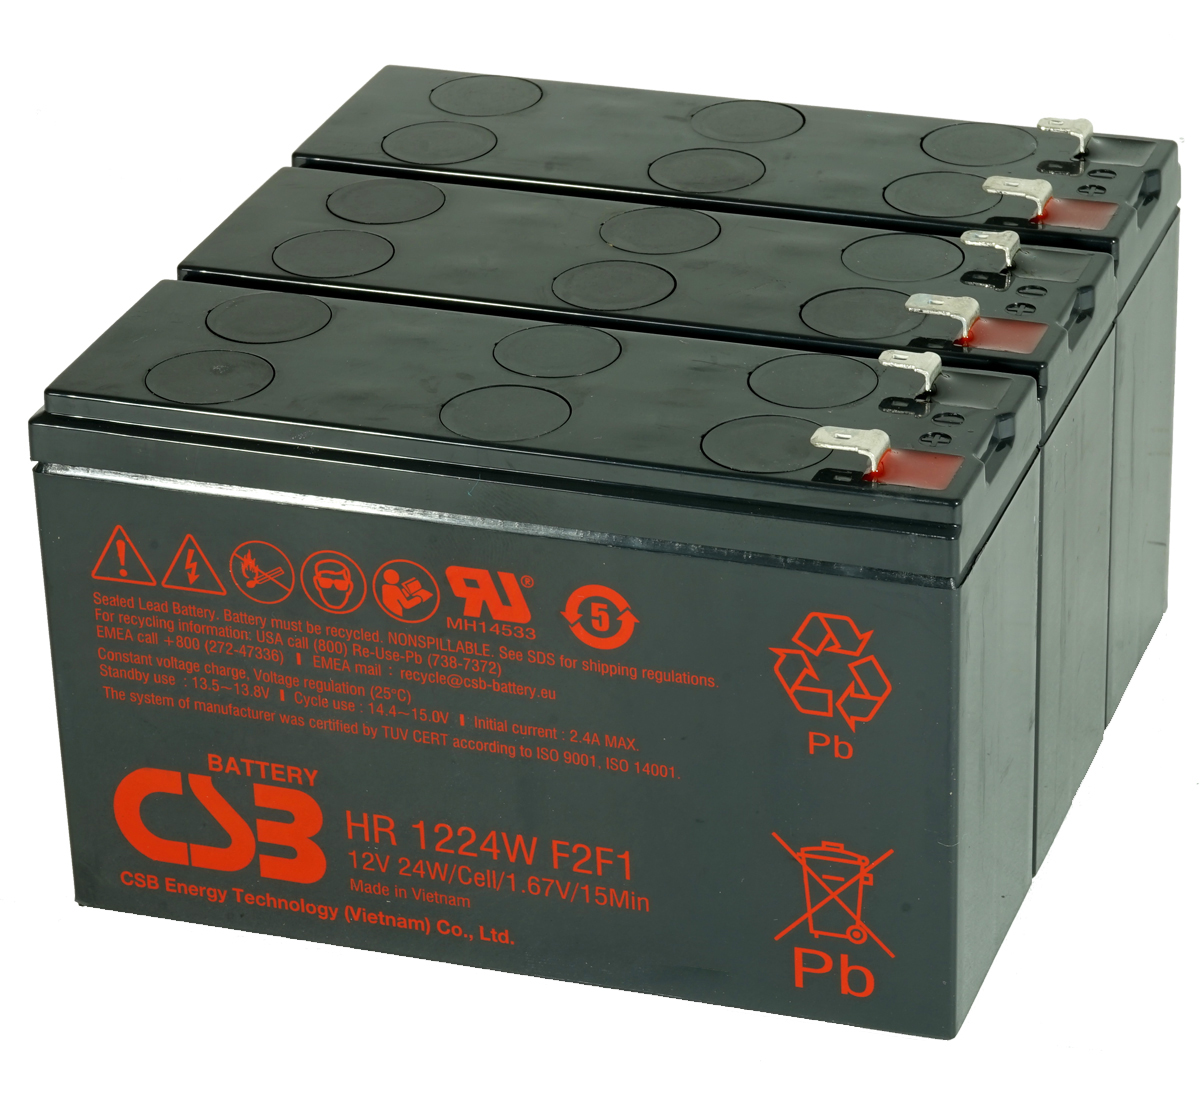 MDS1002 UPS Battery Kit for MGE AB1002